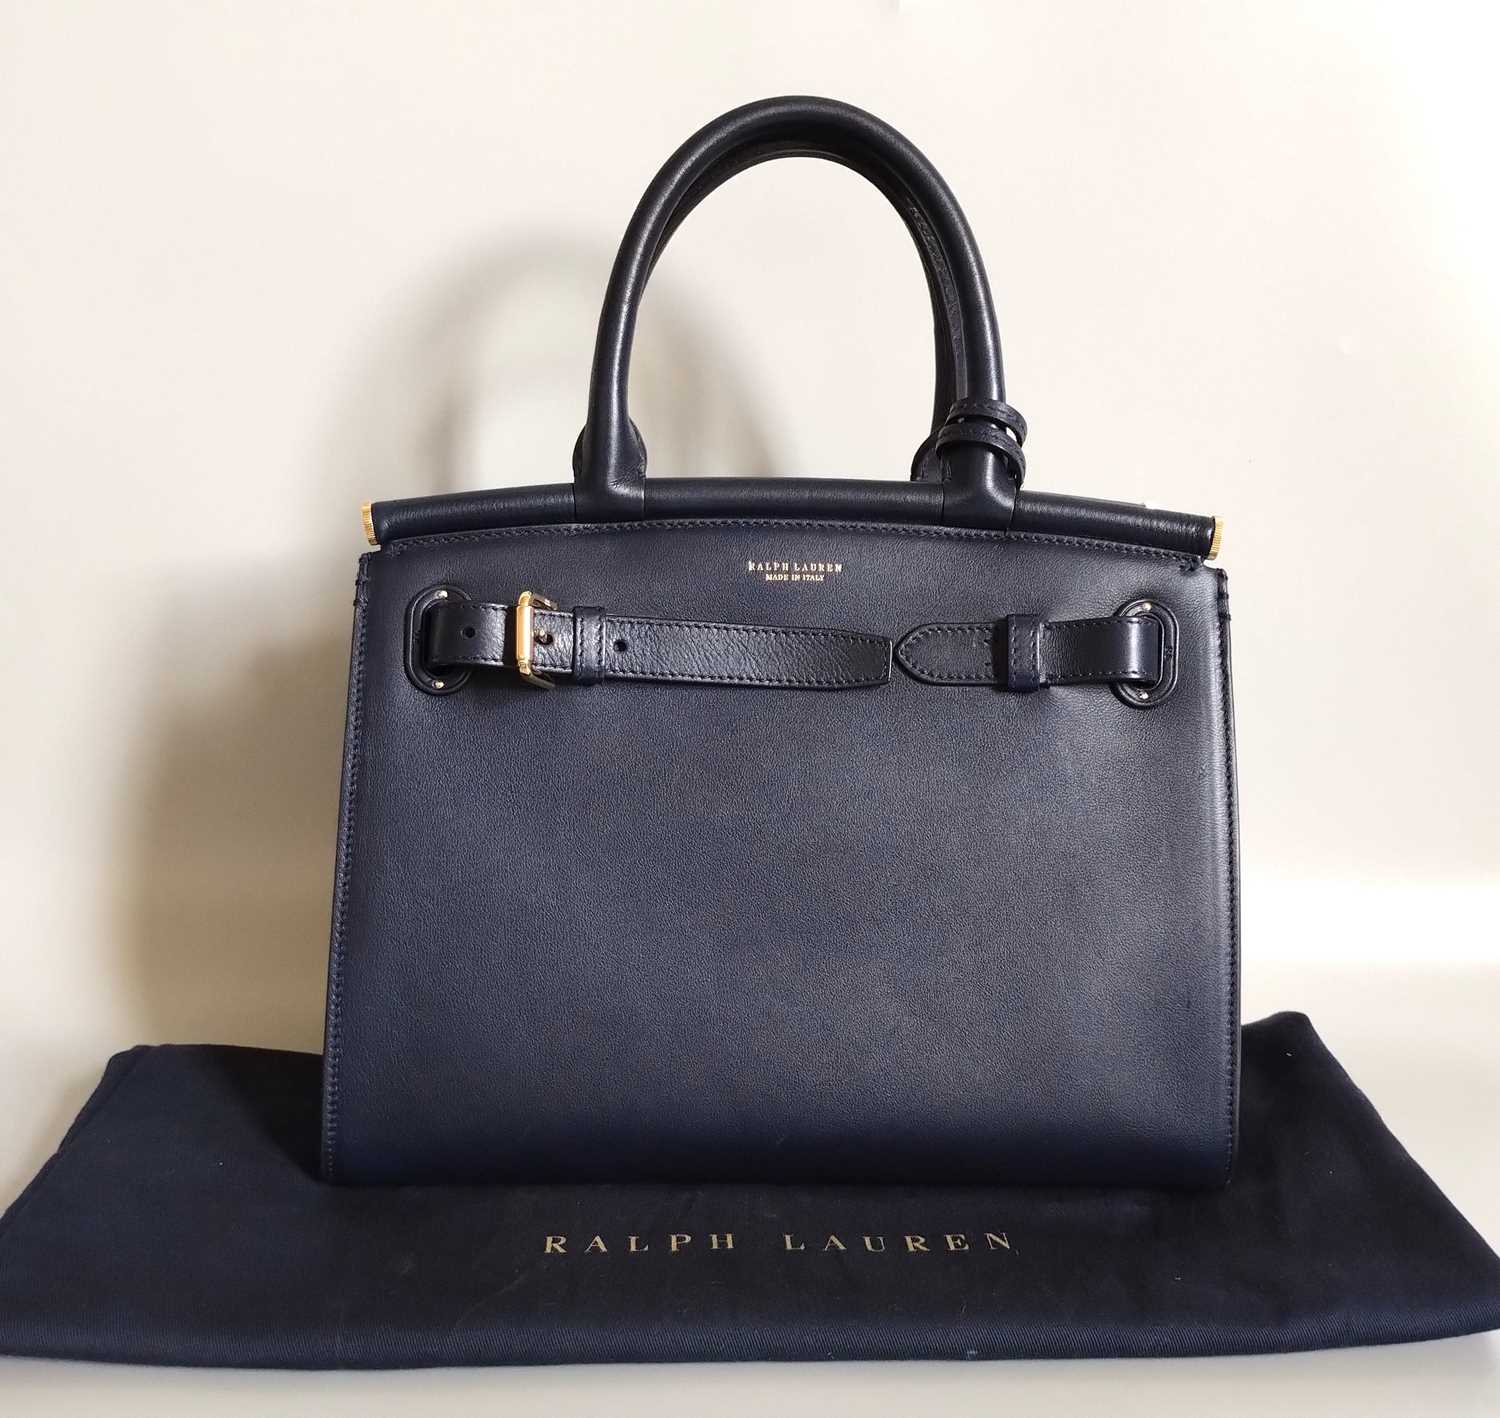 Ralph Lauren Navy Leather RL50 Bag designed to the celebrate the 50th anniversary of the brand, this